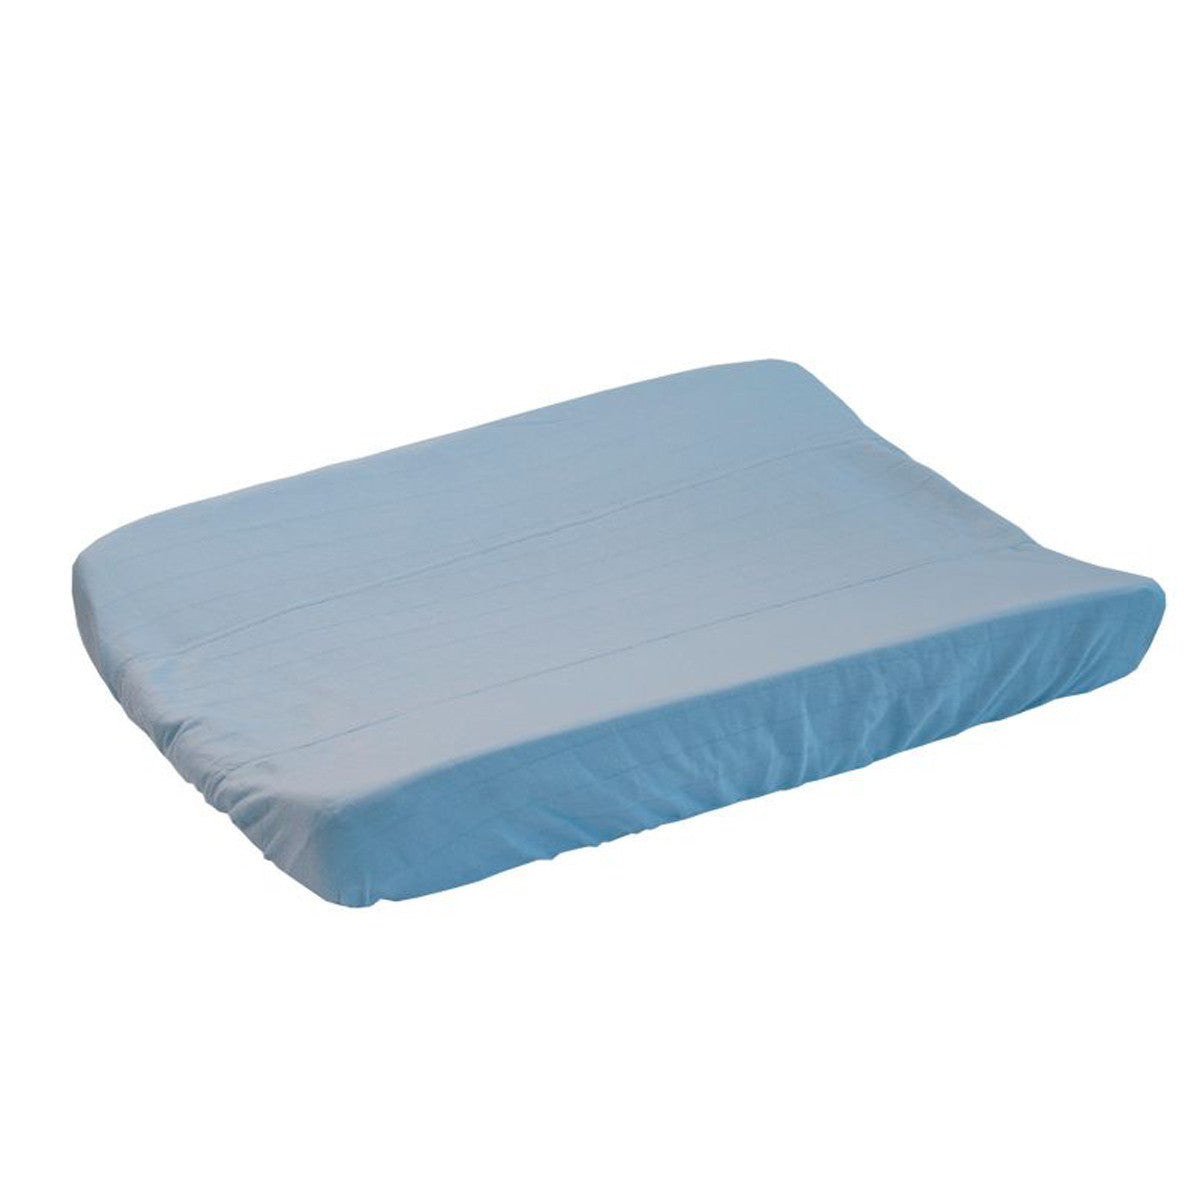 Deer industries nursery bedding lodger solid pure (blue) changing pad cover.Deer Industries Changing pad cover Lodger Solid Mist in grey colour. Stretchable 100% cotton, fine braided, very comfortable for your baby girl or baby boy. 